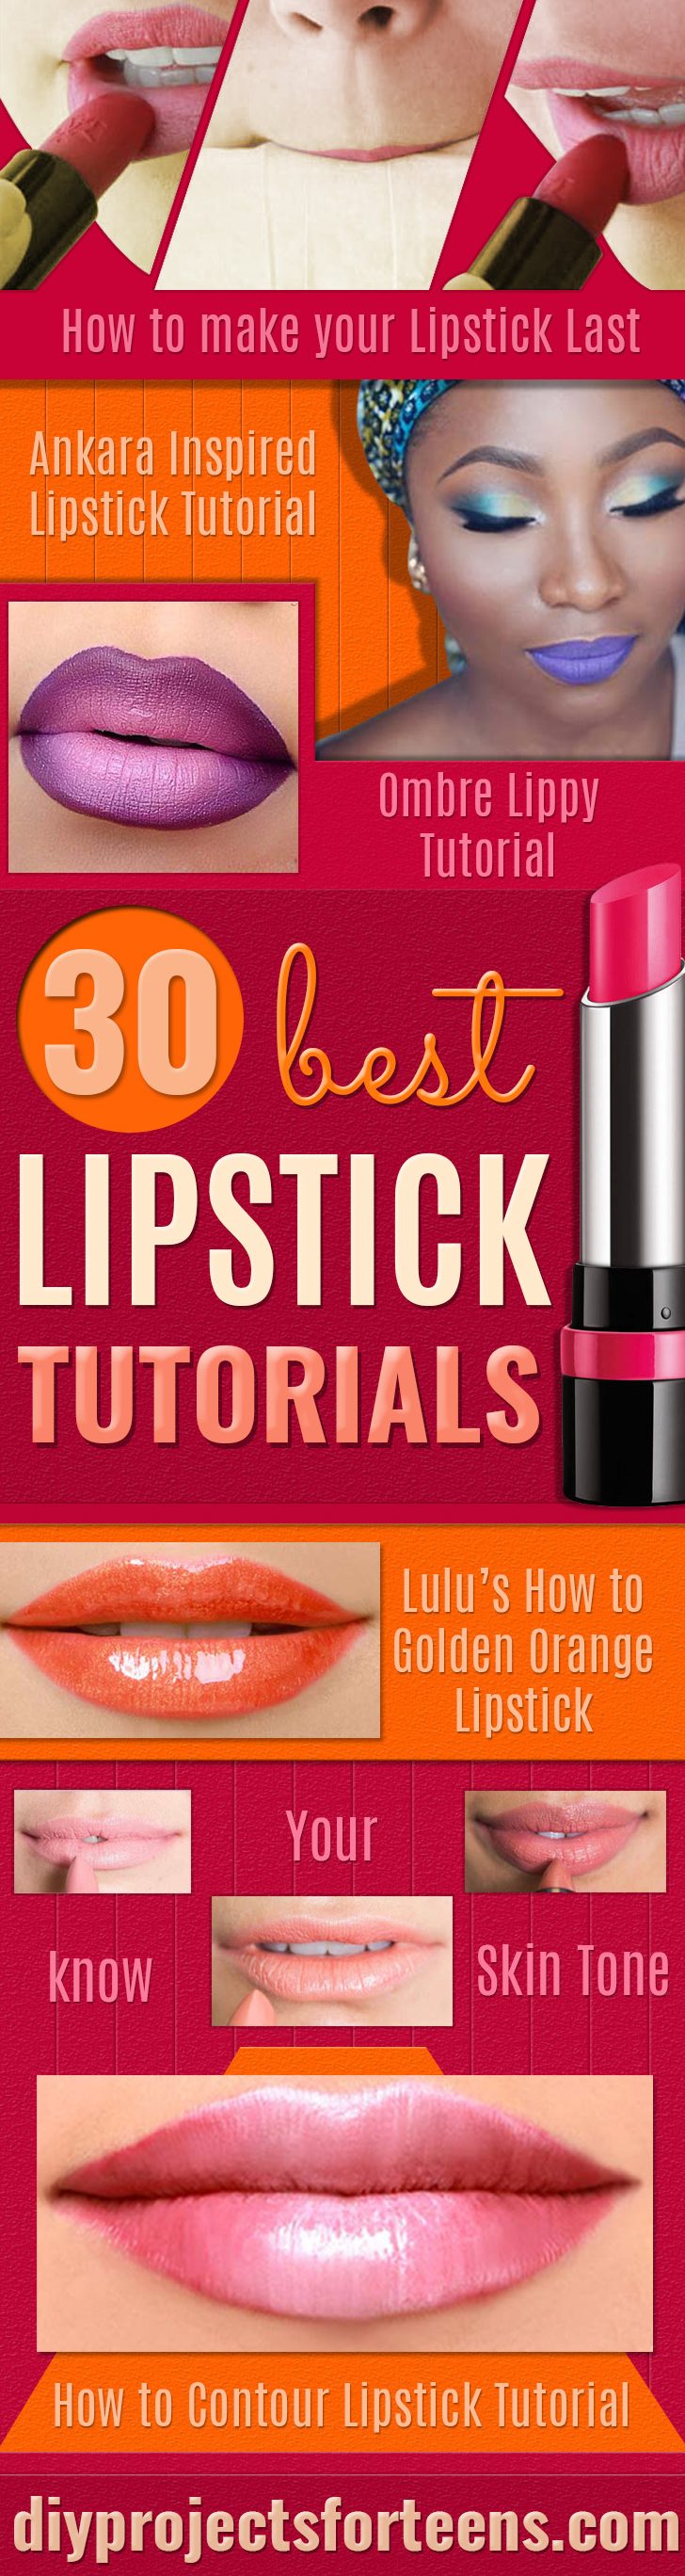 Lipstick Tutorials - Best Step by Step Makeup Tutorial How To - Easy and Quick Ways to Apply Lipstick and Awesome Beauty Ideas - Cool Ideas for Teen Makeup for School, Party and Special Occasion - Makeup Tutorials for Beginners - Lip Liner Tips and Tricks to Add Volume, DIY Lip Techniques for Fuller Lips - DIY Projects and Crafts for Teens 